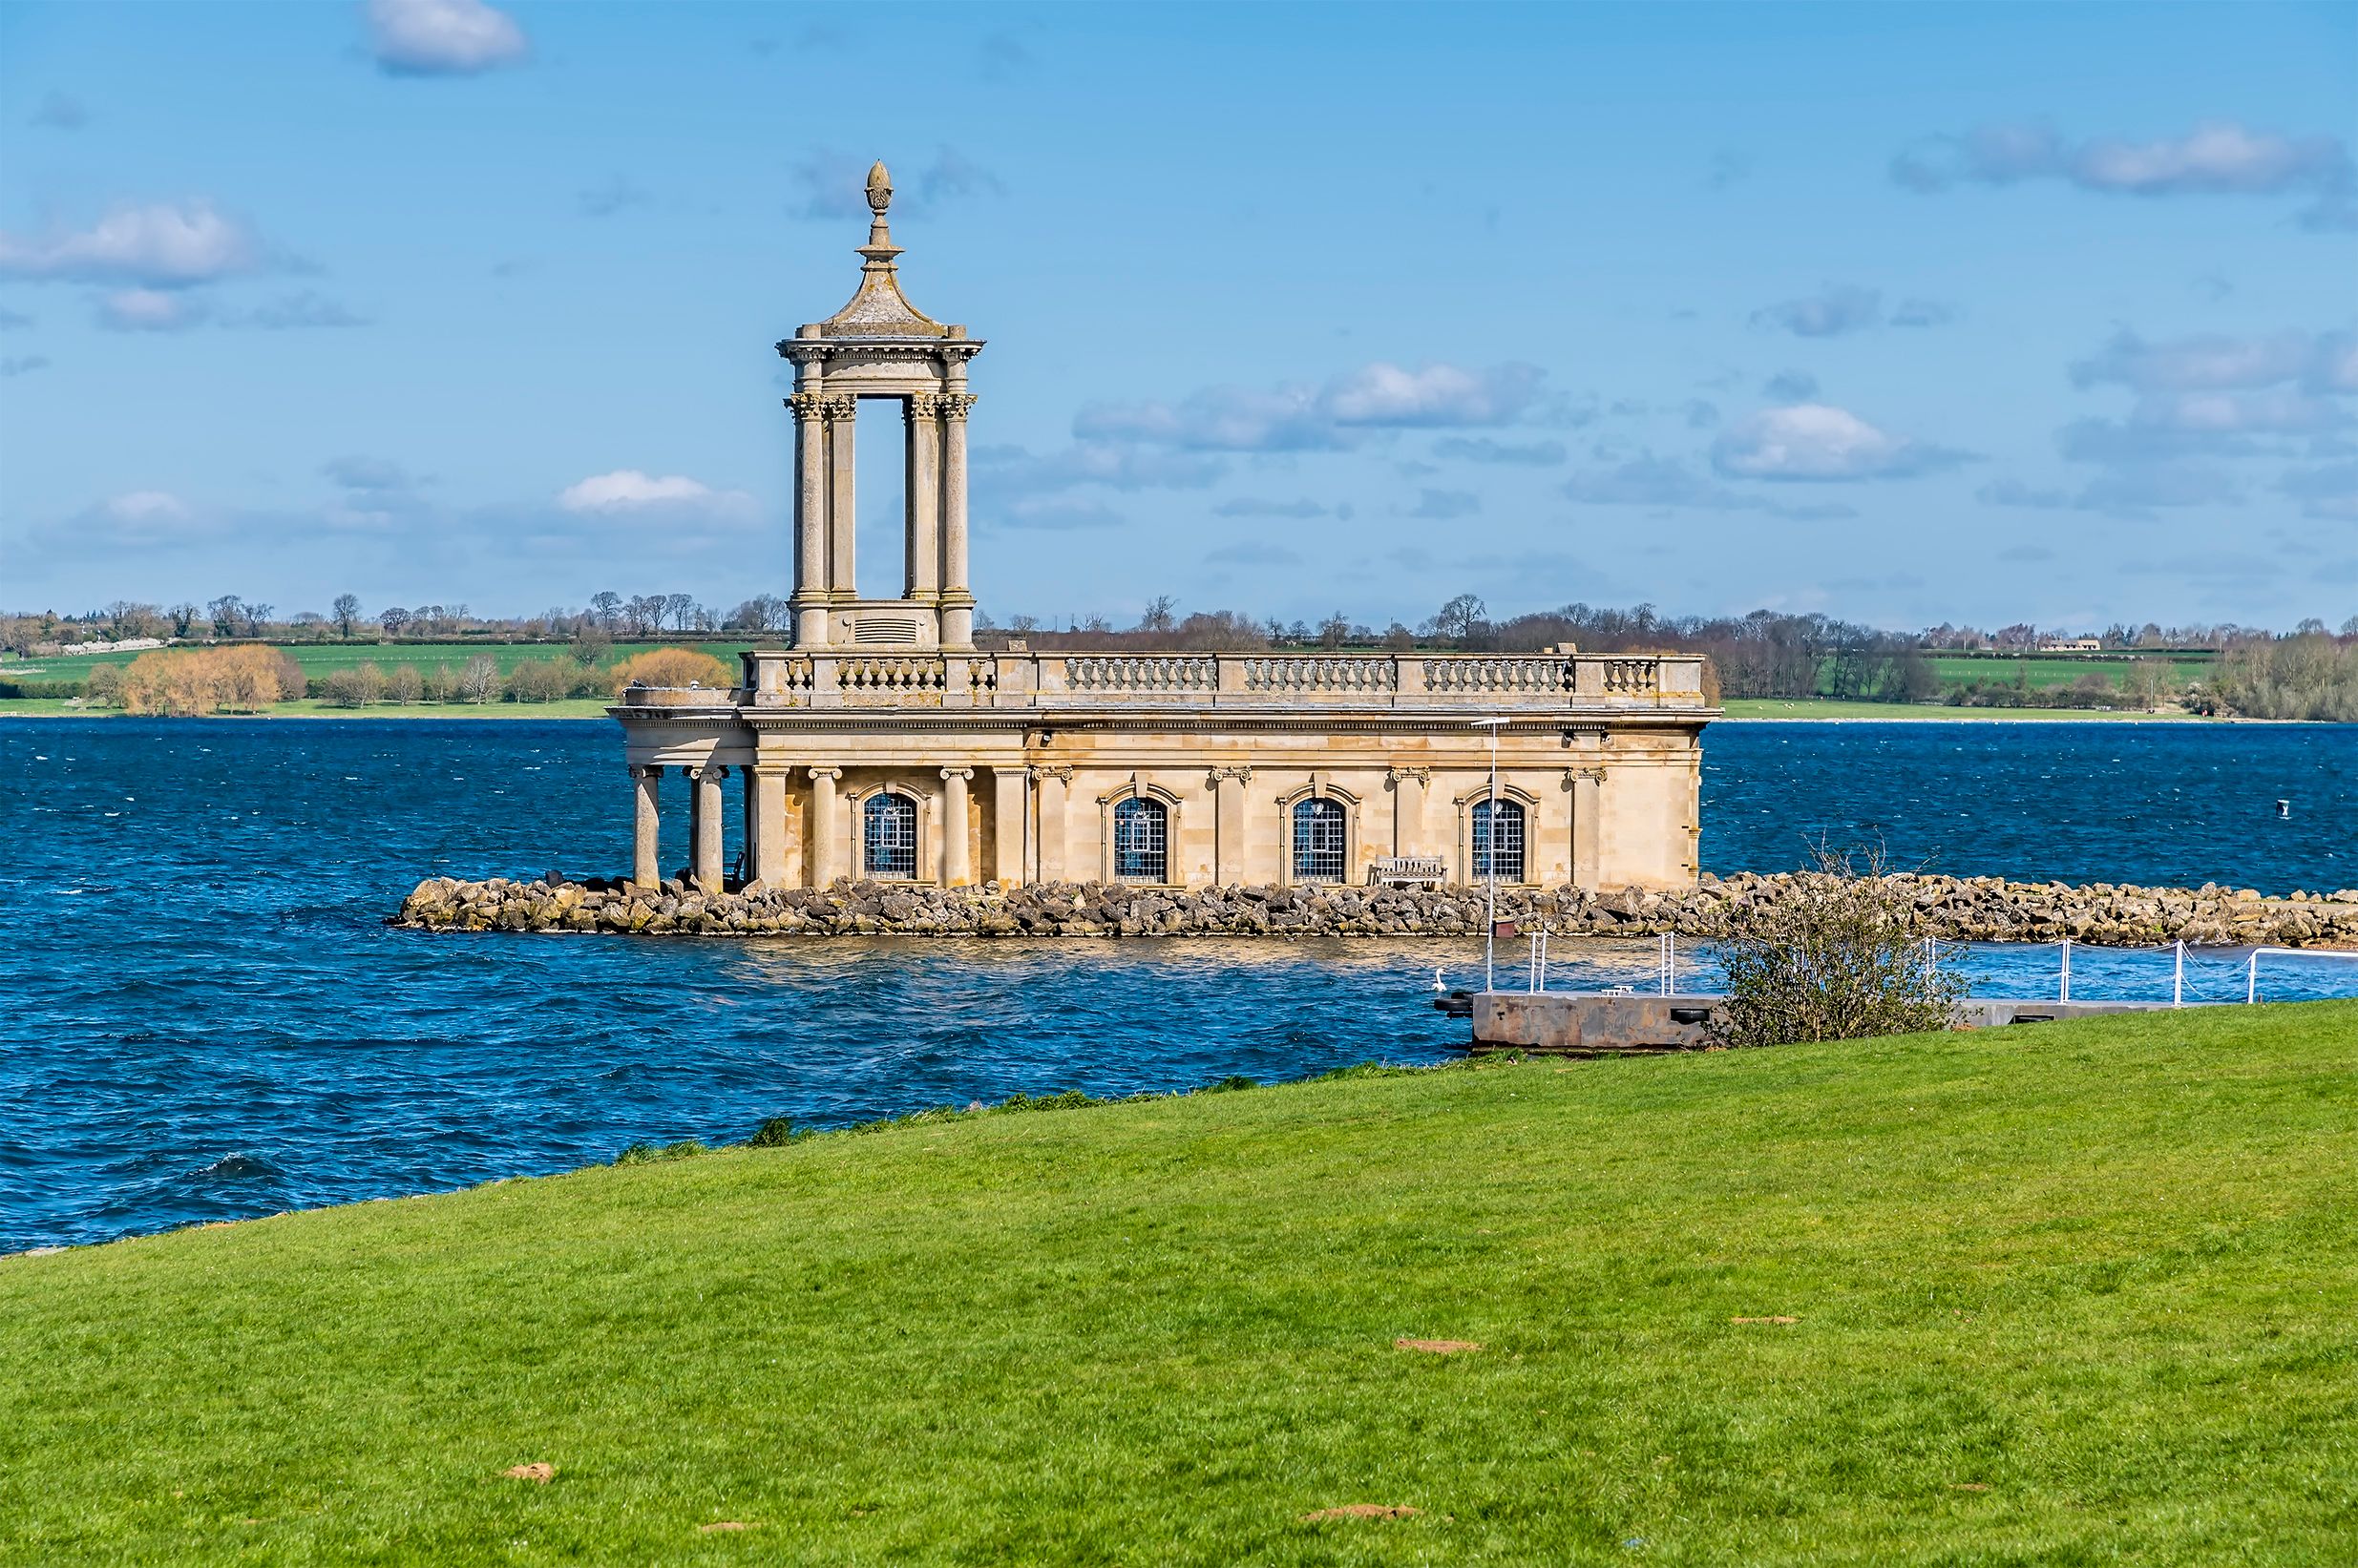 The View Across Rutland Water